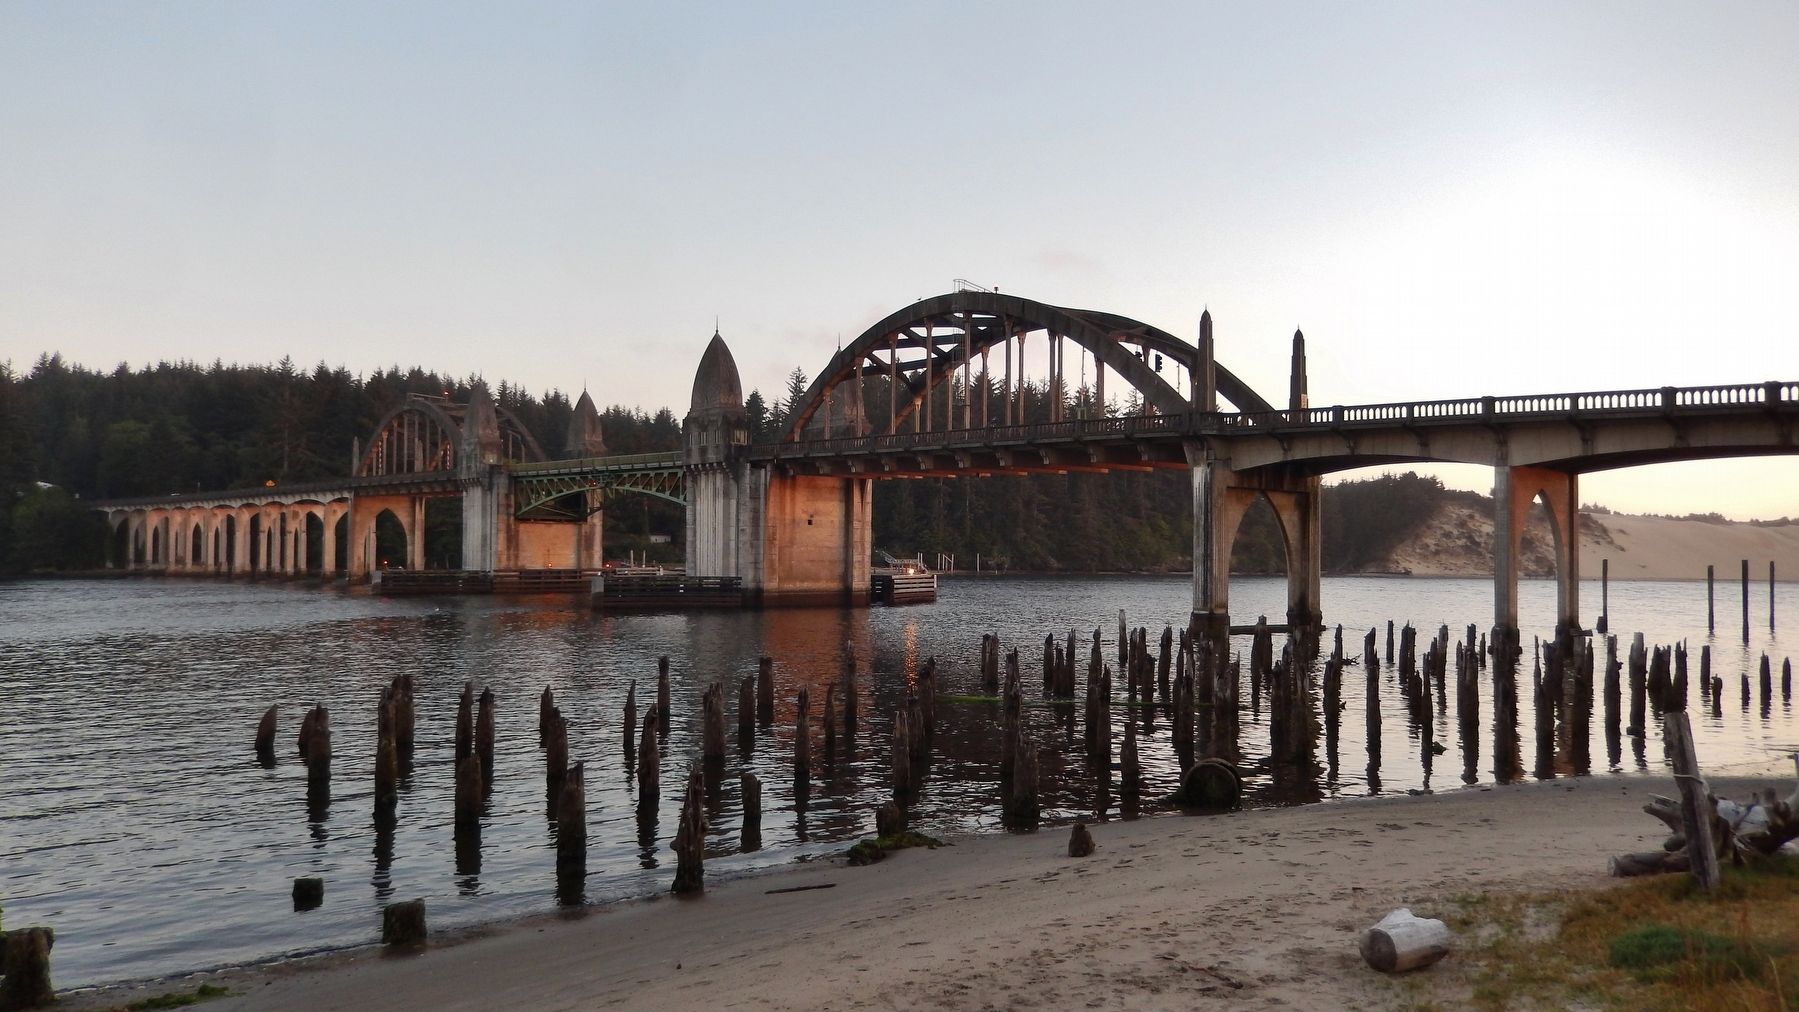 Siuslaw River Bridge (<i>view from near marker</i>) image. Click for full size.